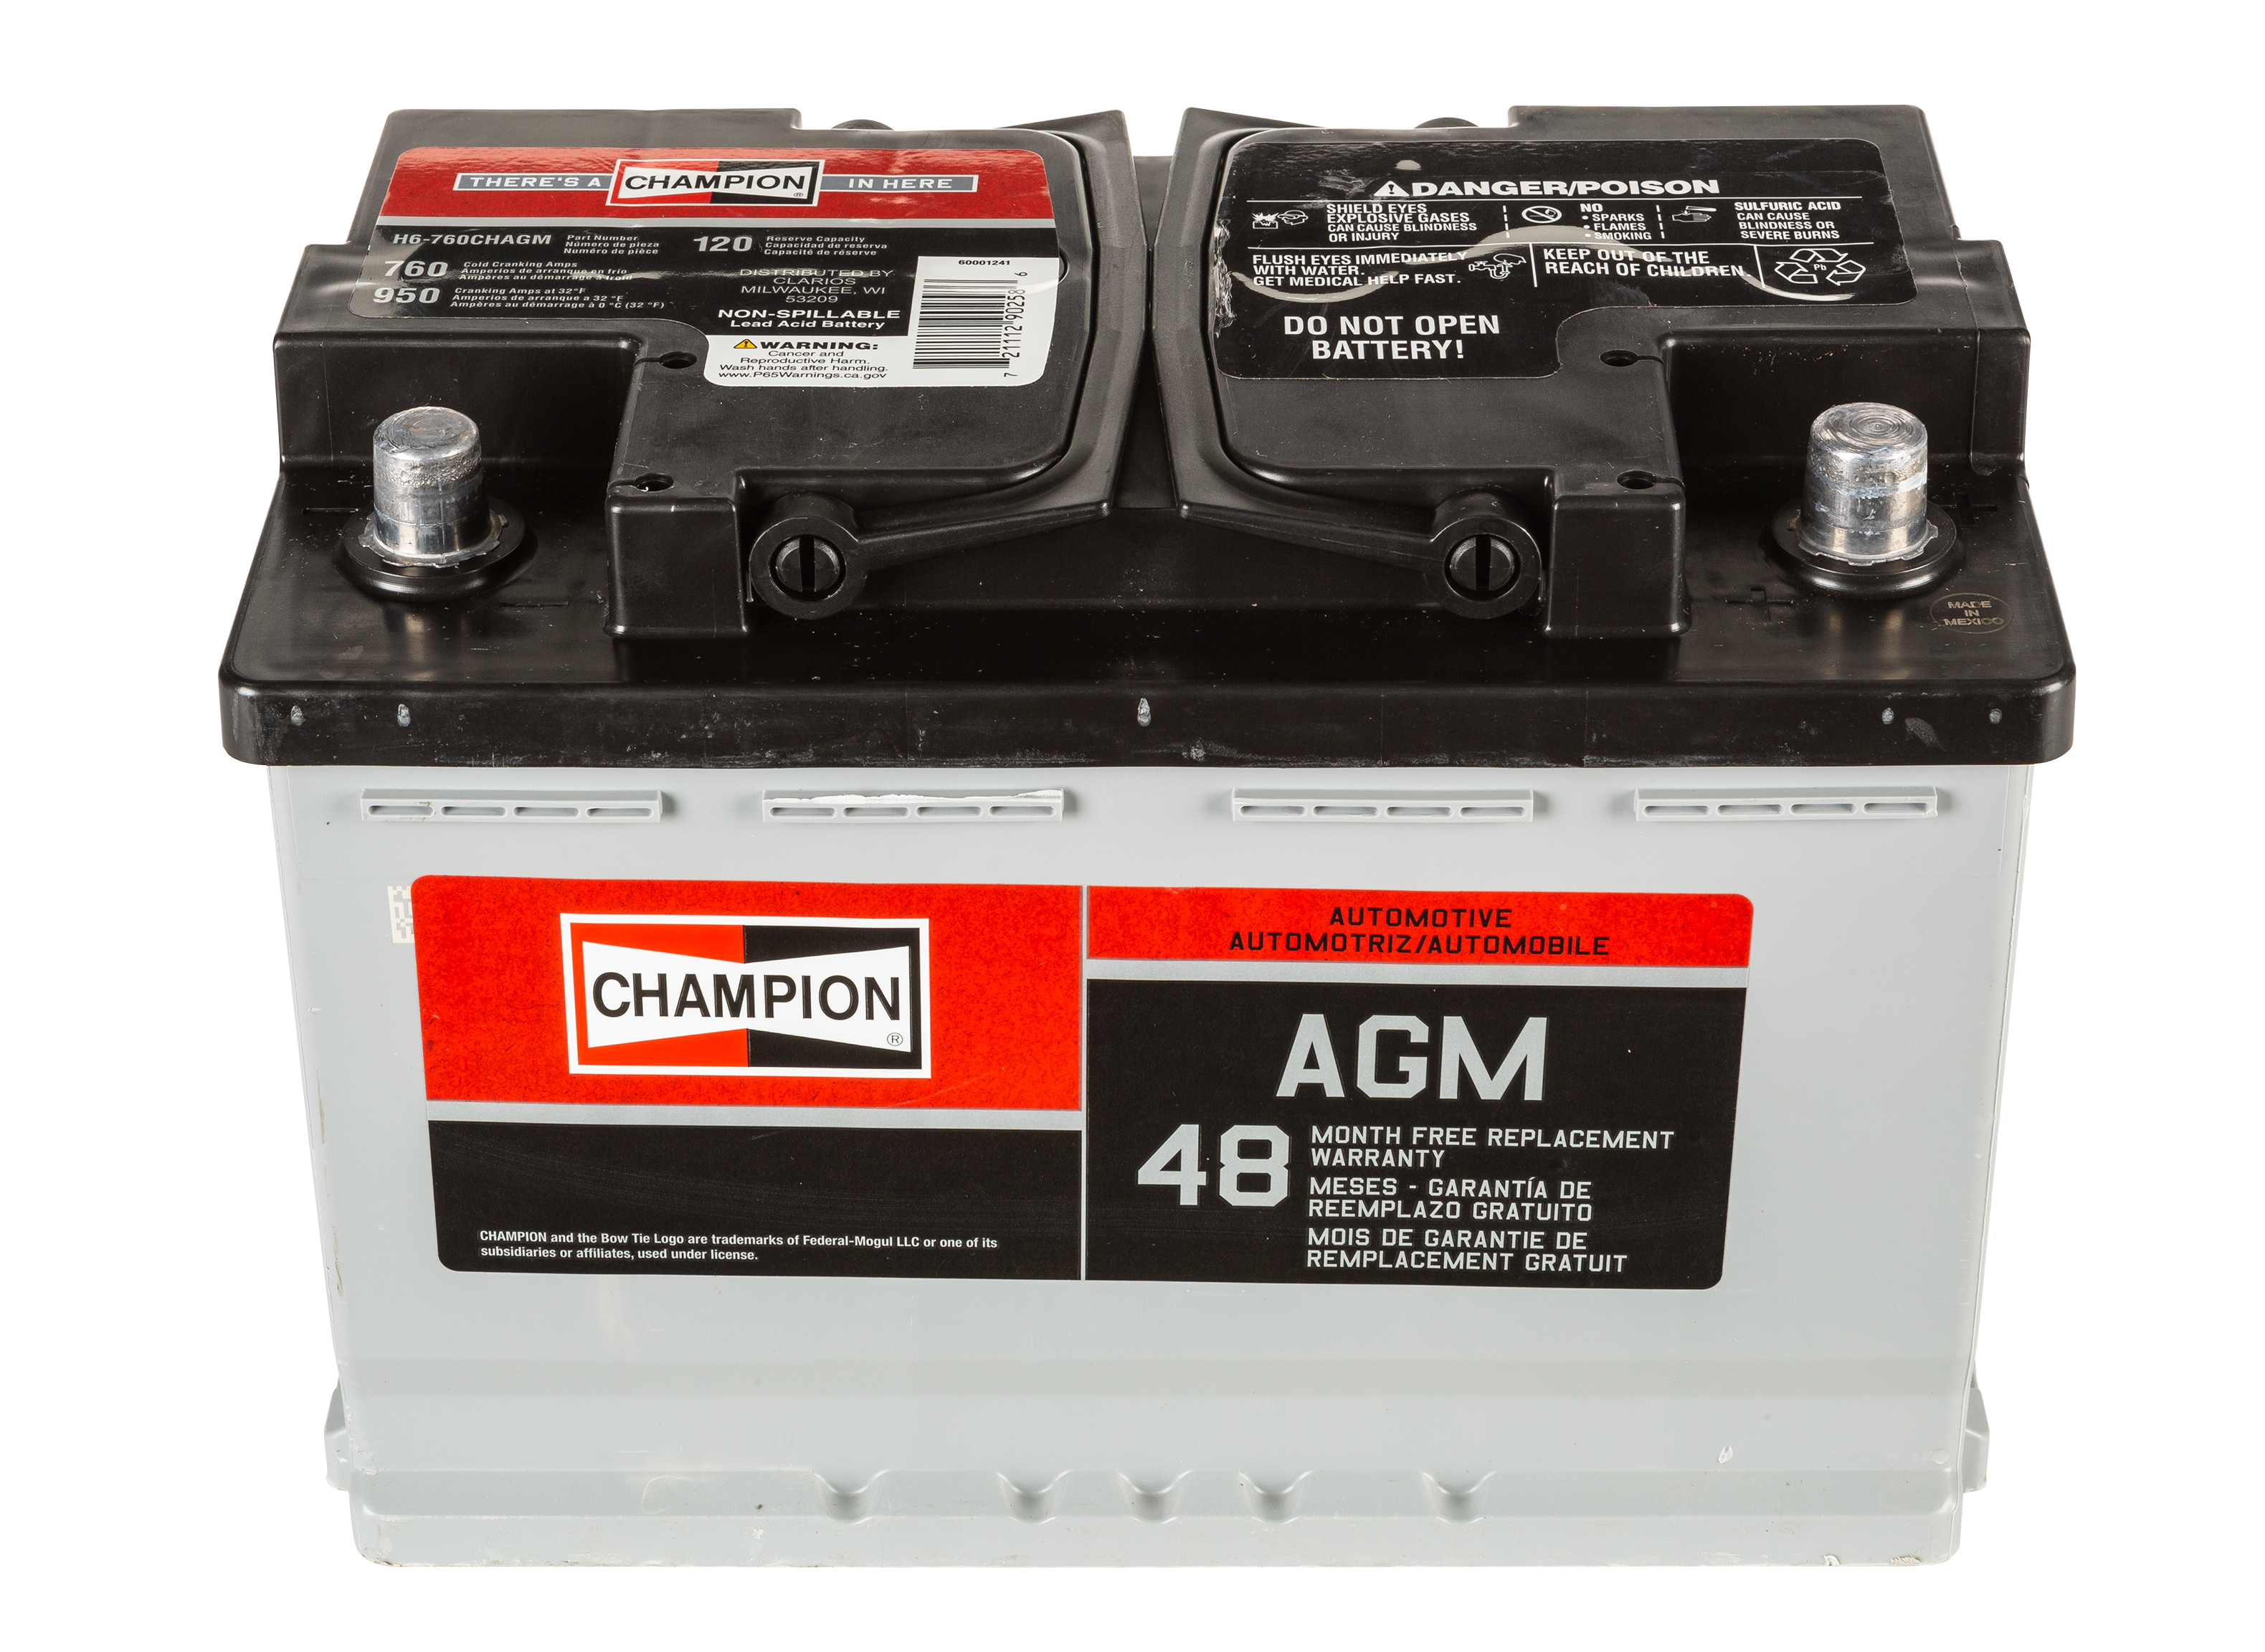 https://crdms.images.consumerreports.org/prod/products/cr/models/401722-group-48-car-batteries-champion-agm-h6-760chagm-10017004.png